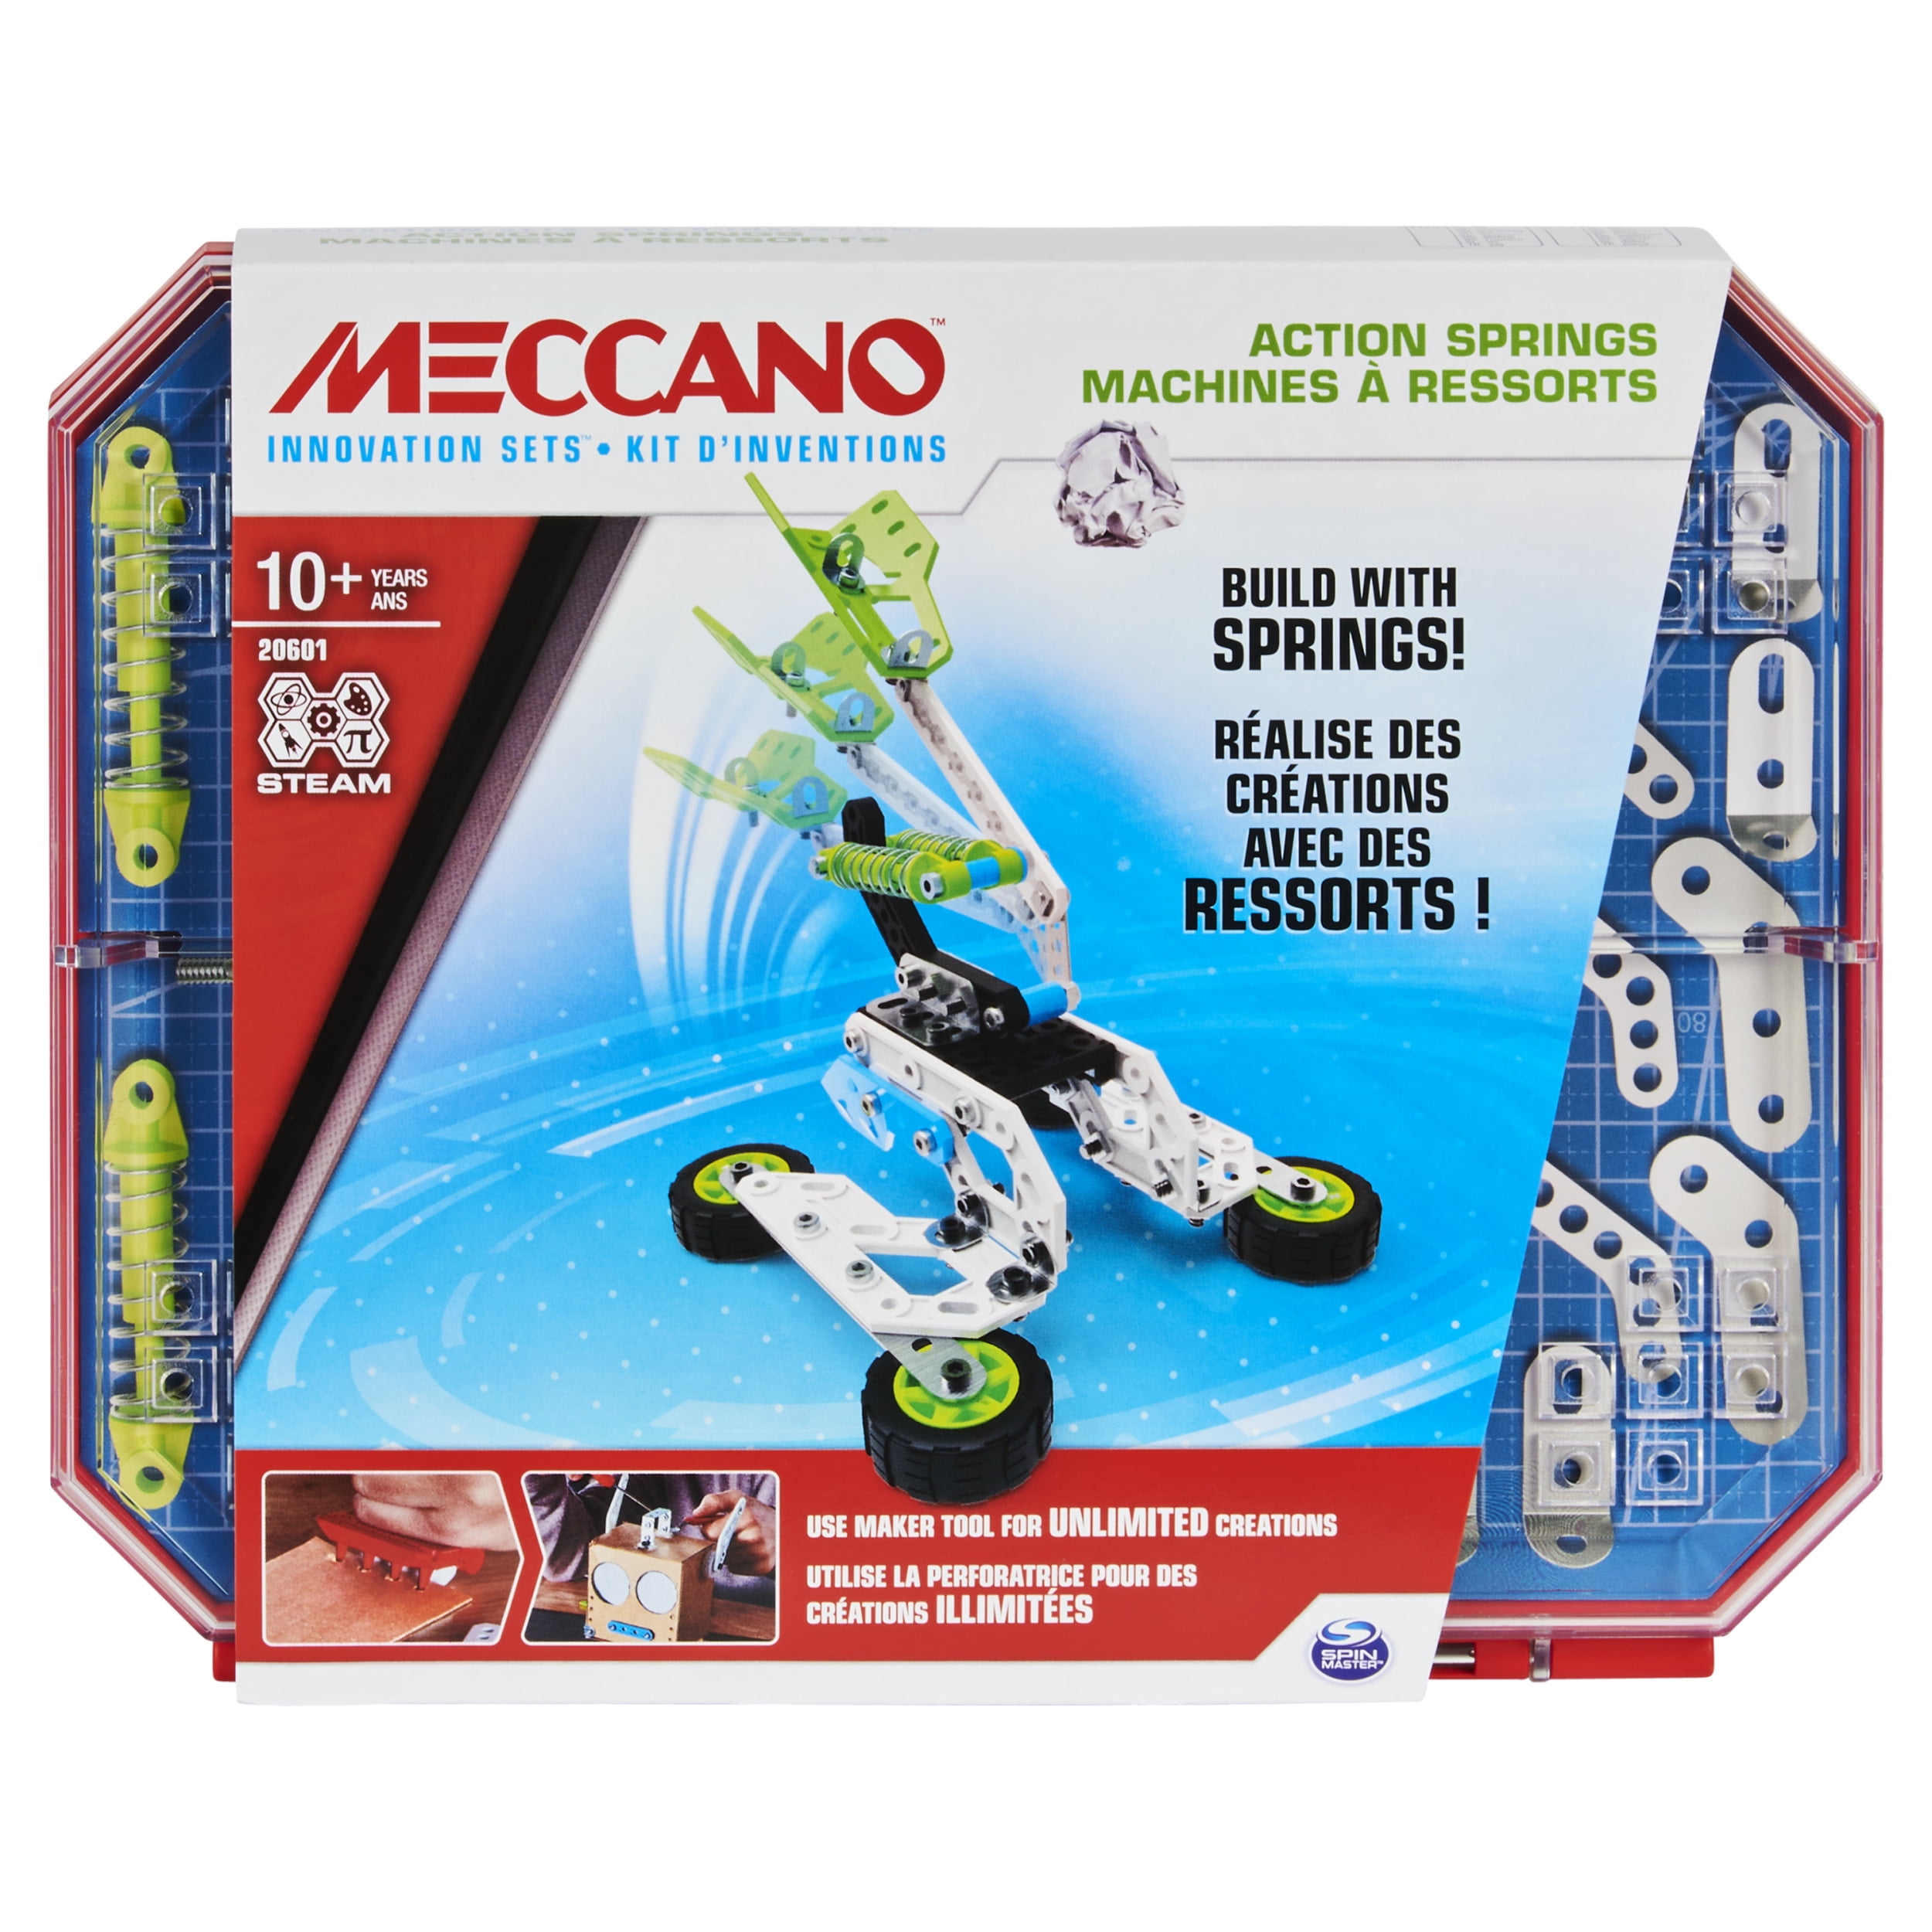 Meccano, Action Springs Innovation Set STEAM Building Kit, for Kids Aged 10  and up